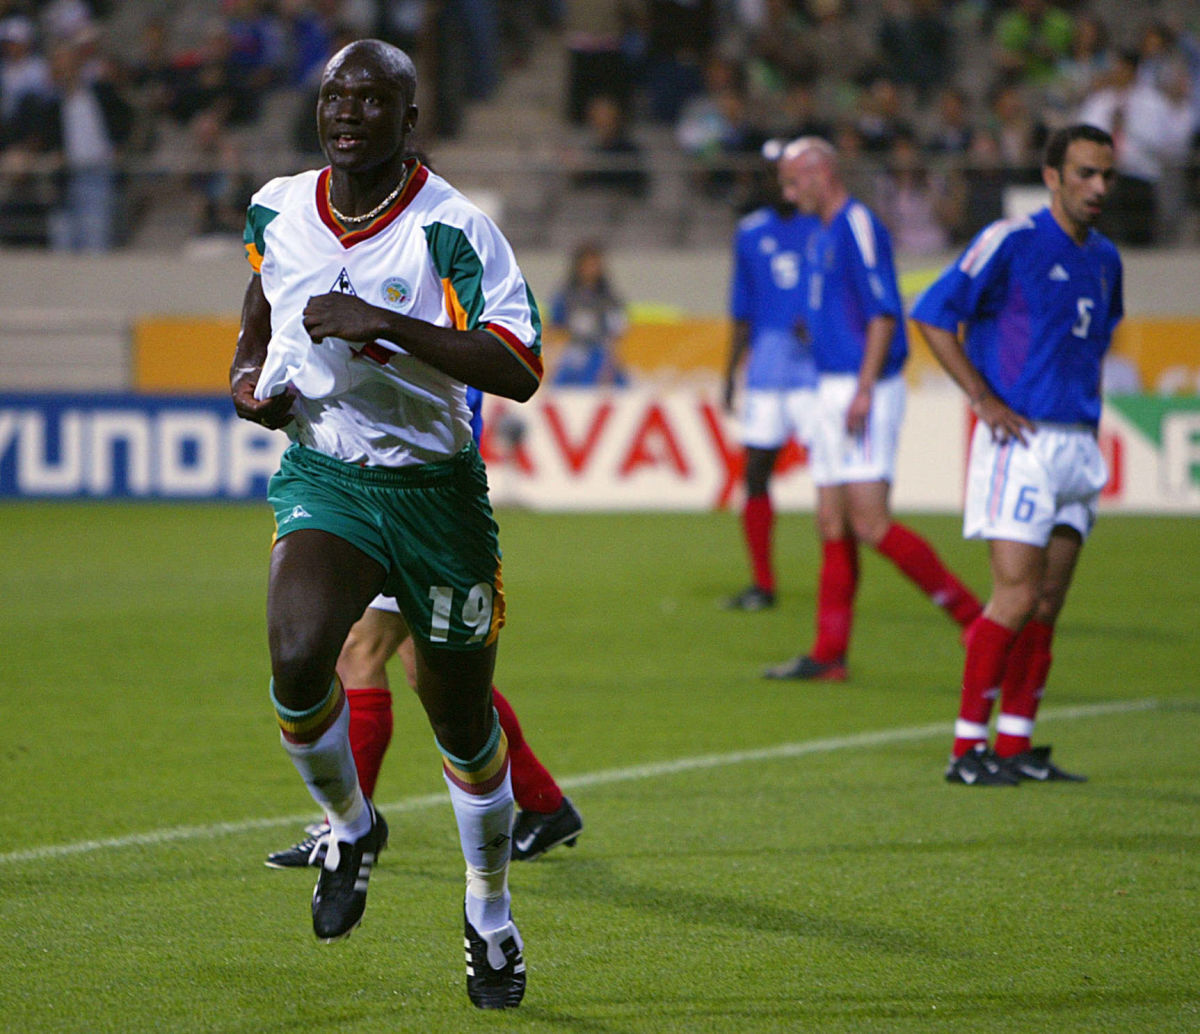 SEOUL, REPUBLIC OF KOREA:  Senegalese midfielder Pape Bouba Diop (L) celebrates after scoring the first goal of the 2002 FIFA World Cup Korea/Japan in Seoul, 31 May 2002.  Senegal jumped out to a 1-0 lead over defending world champions France in their opening Group A match.      AFP PHOTO/Patrick HERTZOG (Photo credit should read PATRICK HERTZOG/AFP/Getty Images)